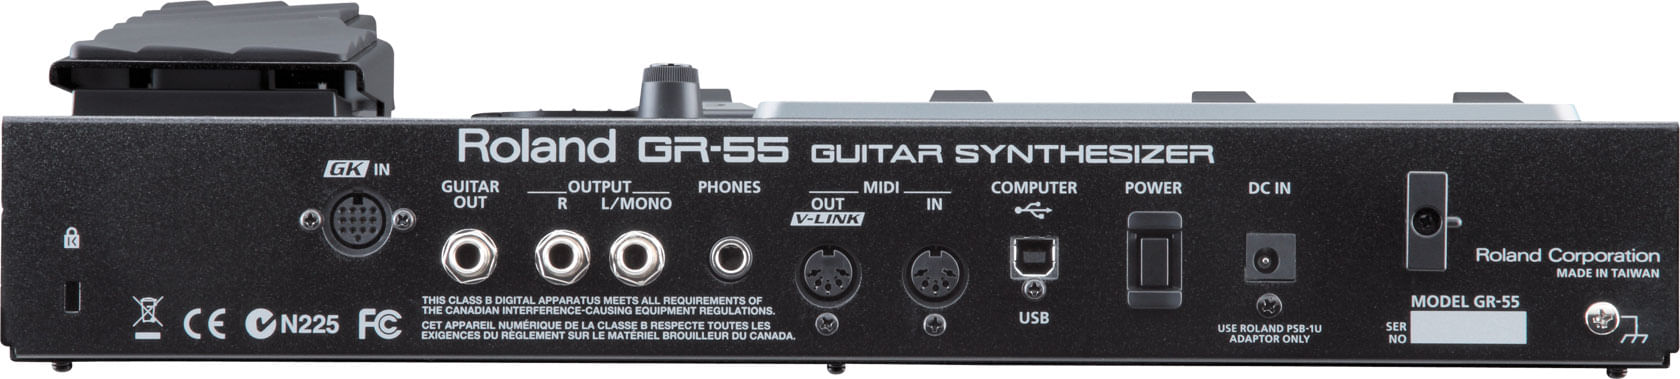 Roland GR-55 Guitar Synthesizer with GK-3 Pickup - Black - Cosmo Music |  Canada's #1 Music Store - Shop, Rent, Repair